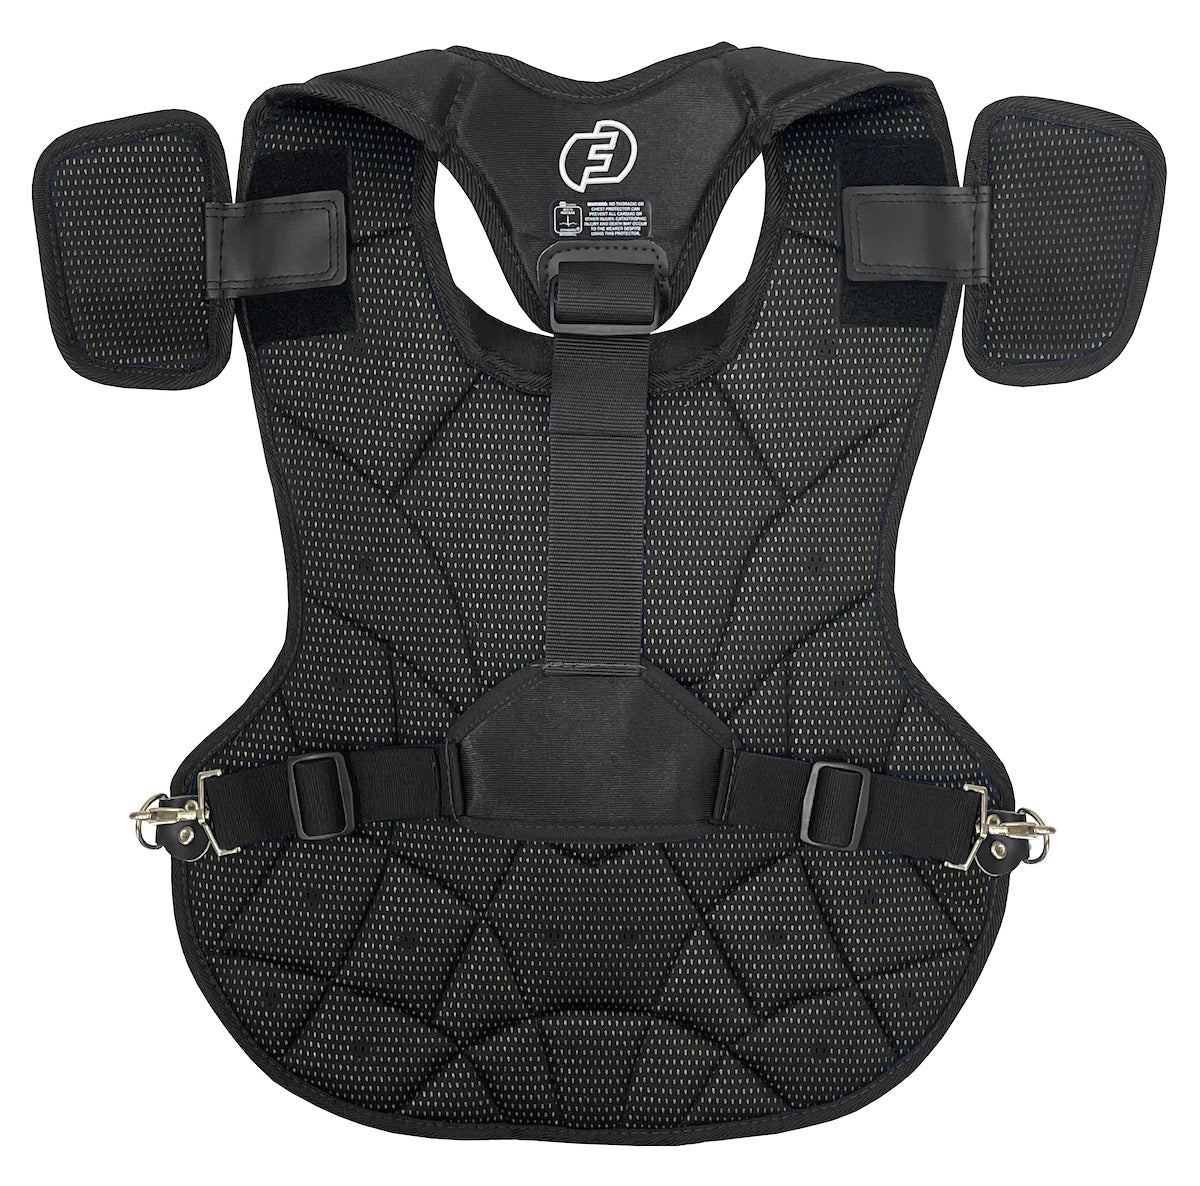 Force3 Catcher NOCSAE Certified Chest Protector with Dupont